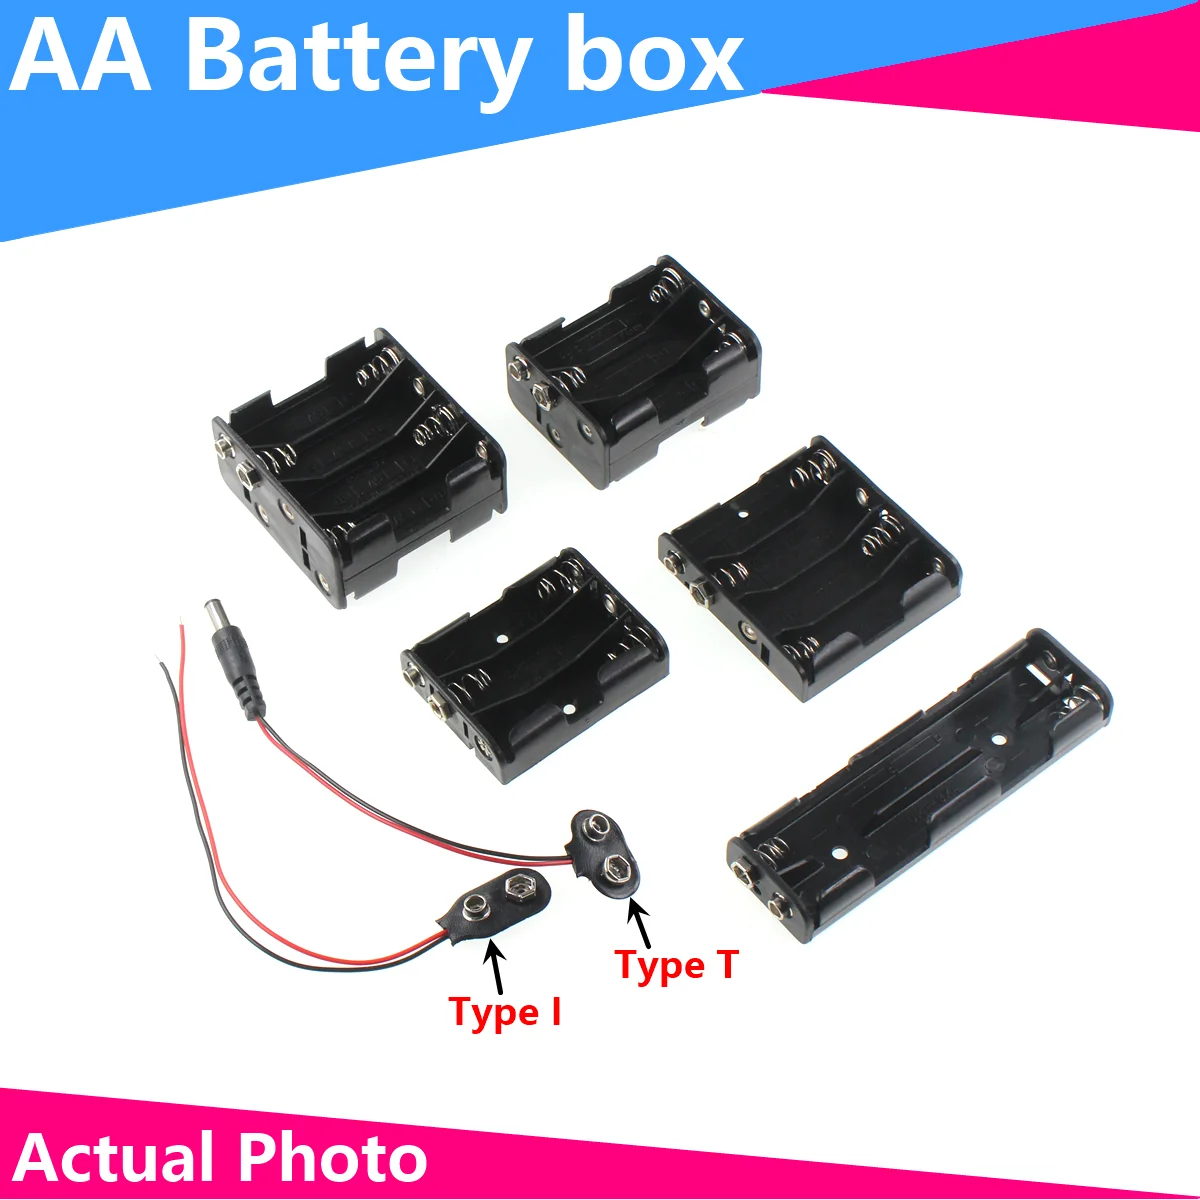 

AA Back-to-back battery box AA 2X 3X 4X 6X 8X with 9V clasp 9V cable Double strip battery holder Vertical Horizontal I T plug so